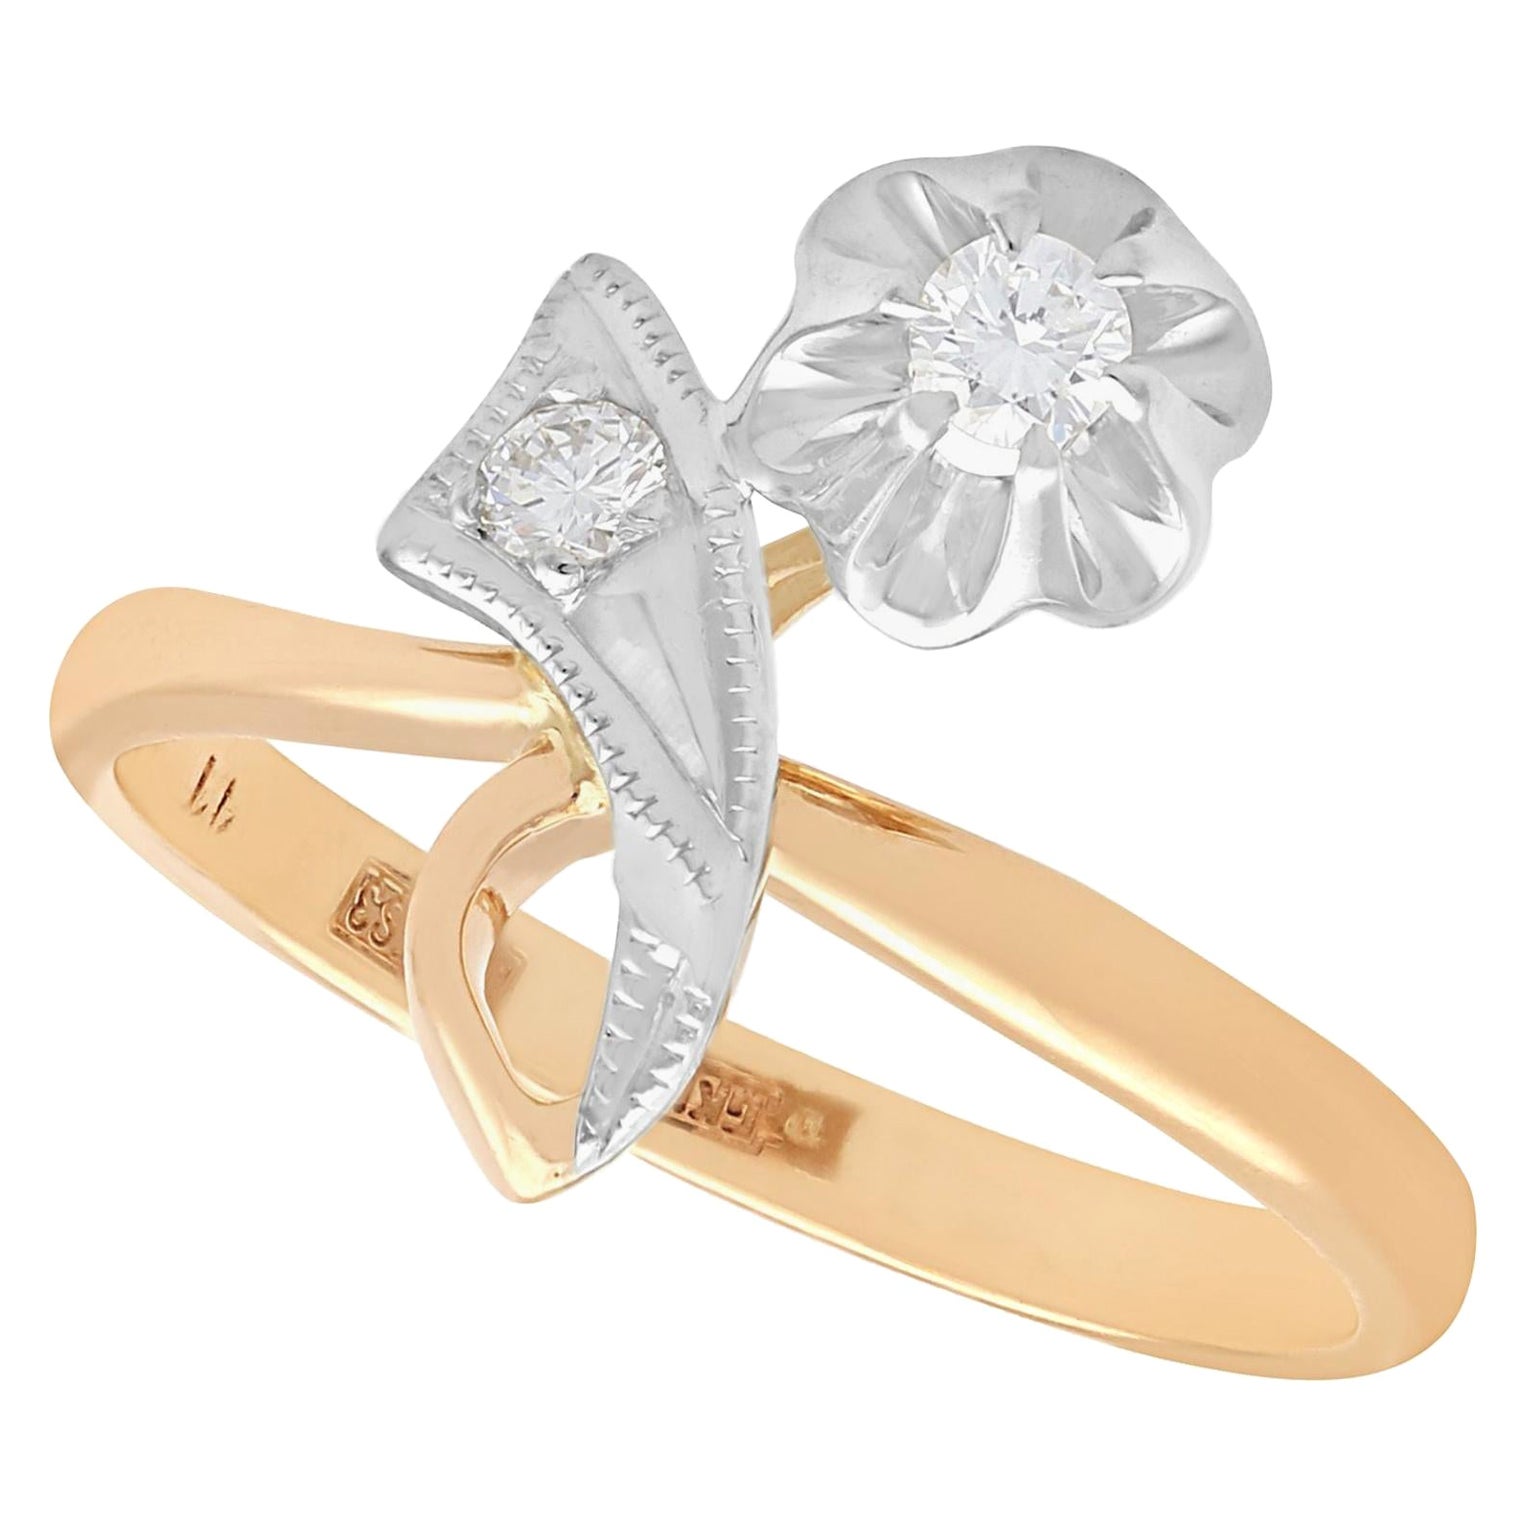 Flying Wings Couple Ring